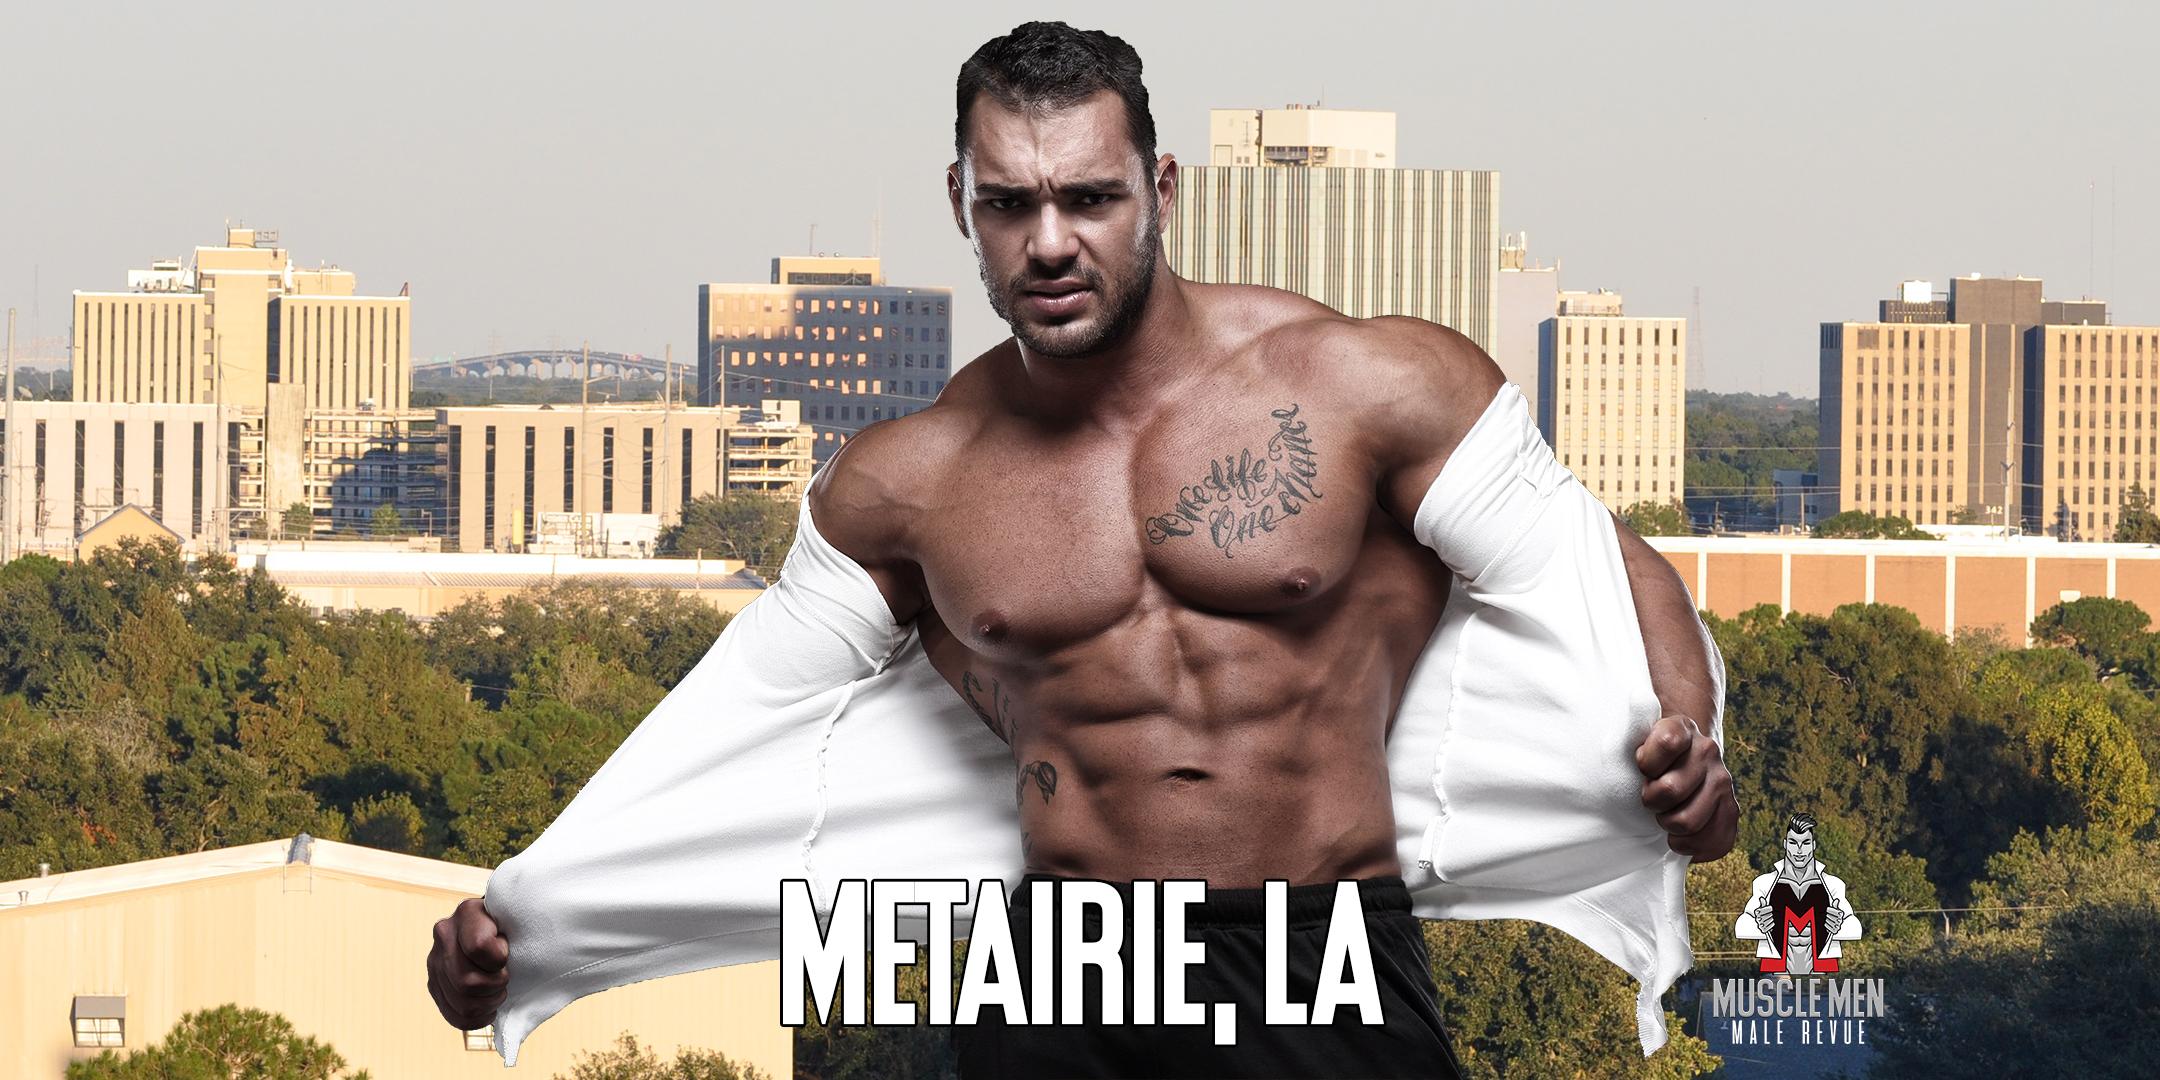 Muscle Men Male Strippers Revue And Male Strip Club Shows Metairie La 8pm 10pm 11 Sep 2020